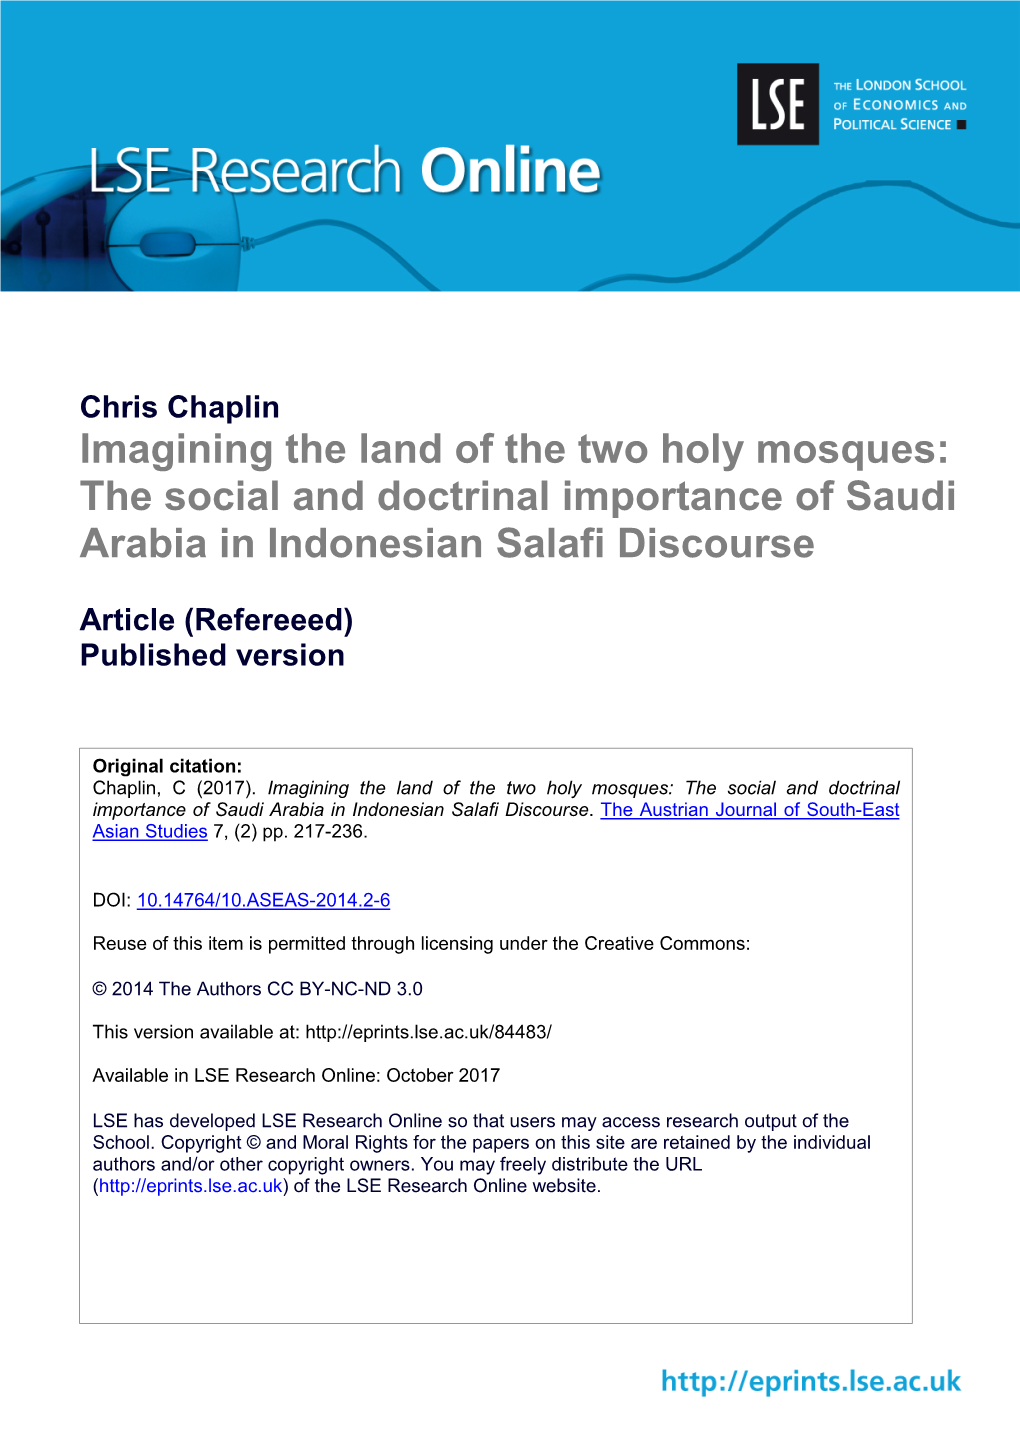 Imagining the Land of the Two Holy Mosques: the Social and Doctrinal Importance of Saudi Arabia in Indonesian Salafi Discourse